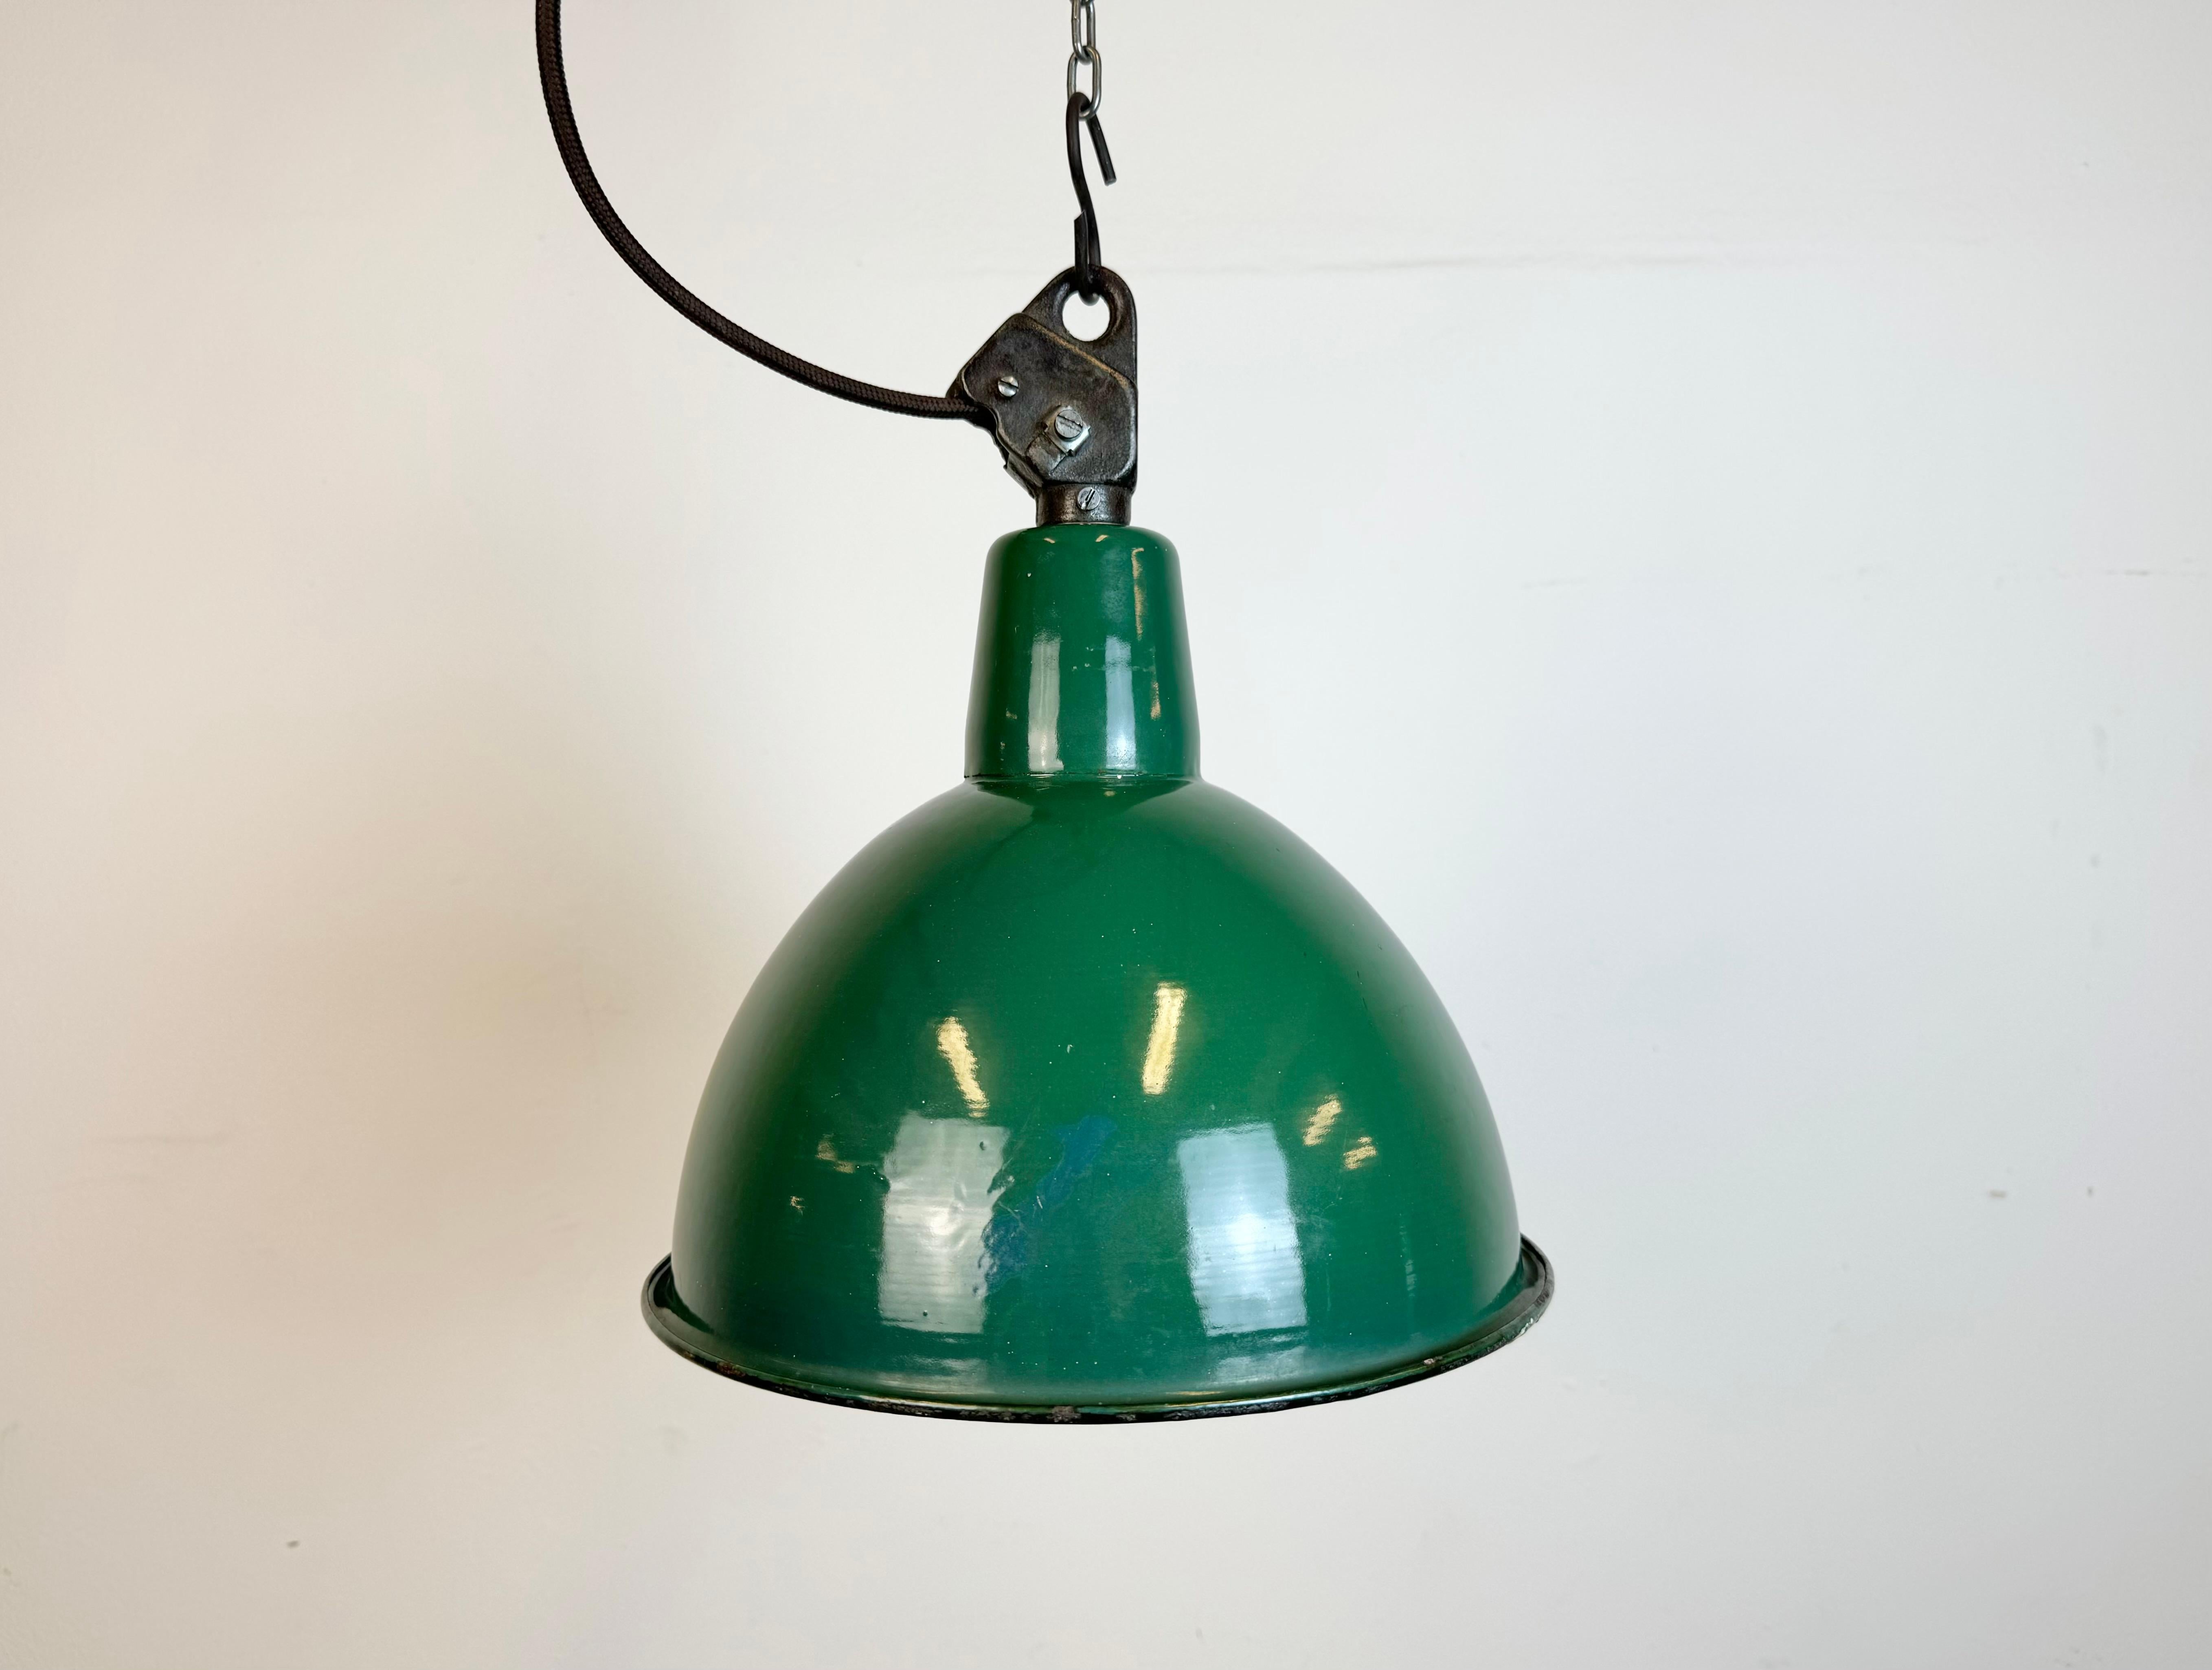 Industrial green enamel pendant light made by A23 factory in Wilkasy in Poland during the 1960s. White enamel inside the shade. Cast iron top. The porcelain socket requires standard E 27/ E26 light bulbs. New wire. Fully functional. The weight of